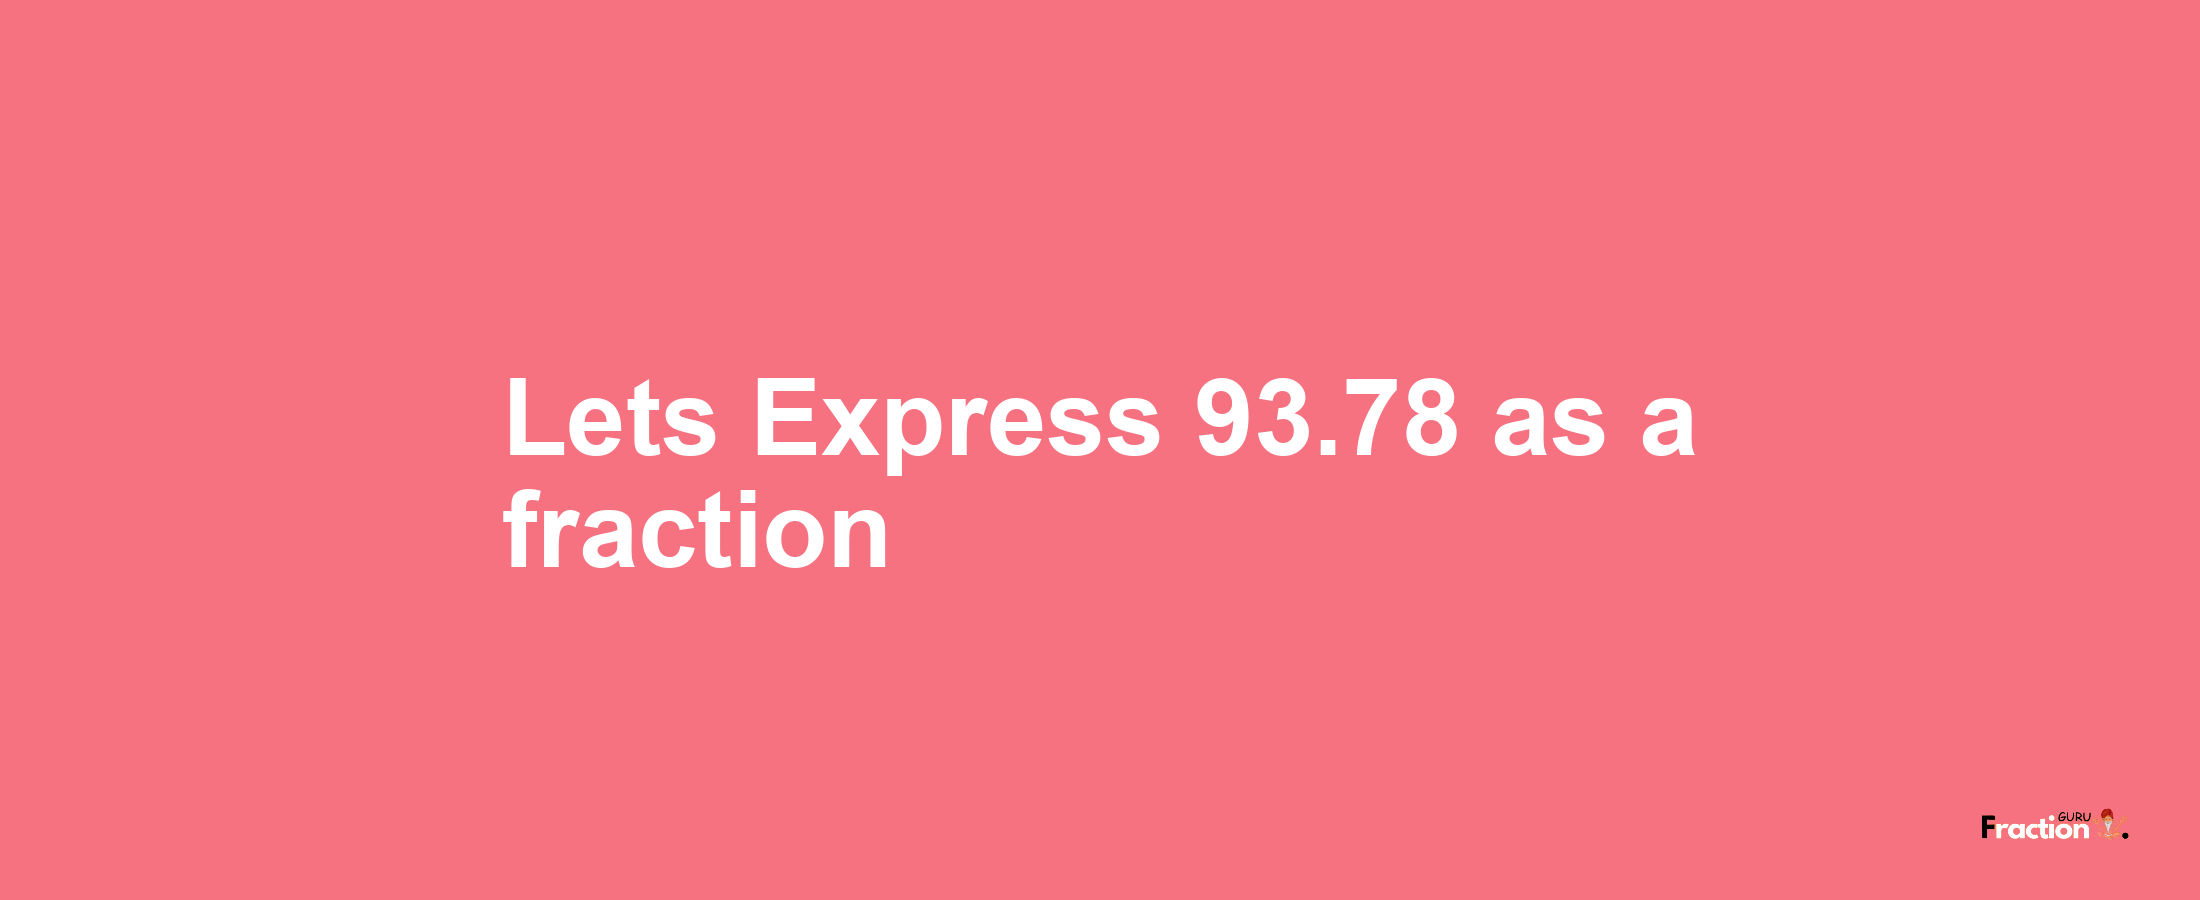 Lets Express 93.78 as afraction